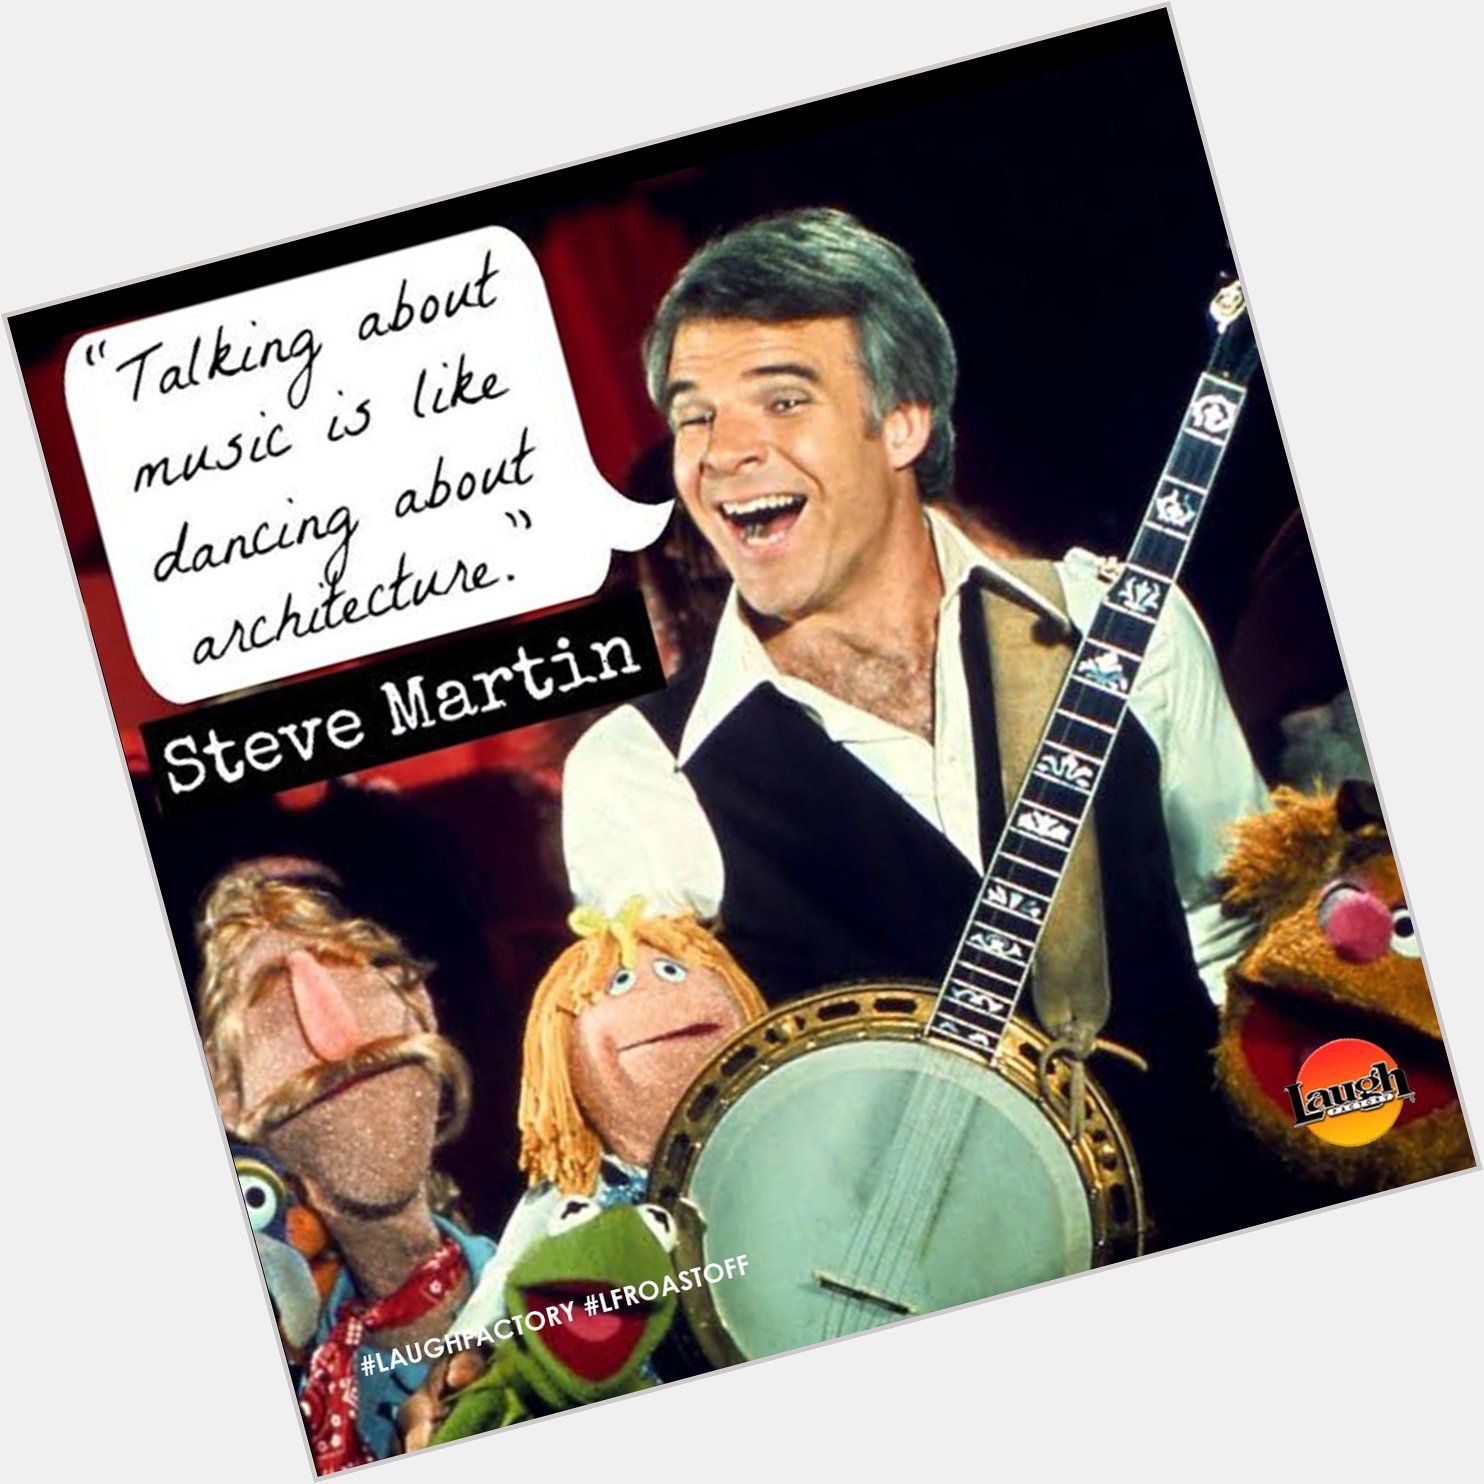 We want to wish a happy birthday to The World Famous Steve Martin!  